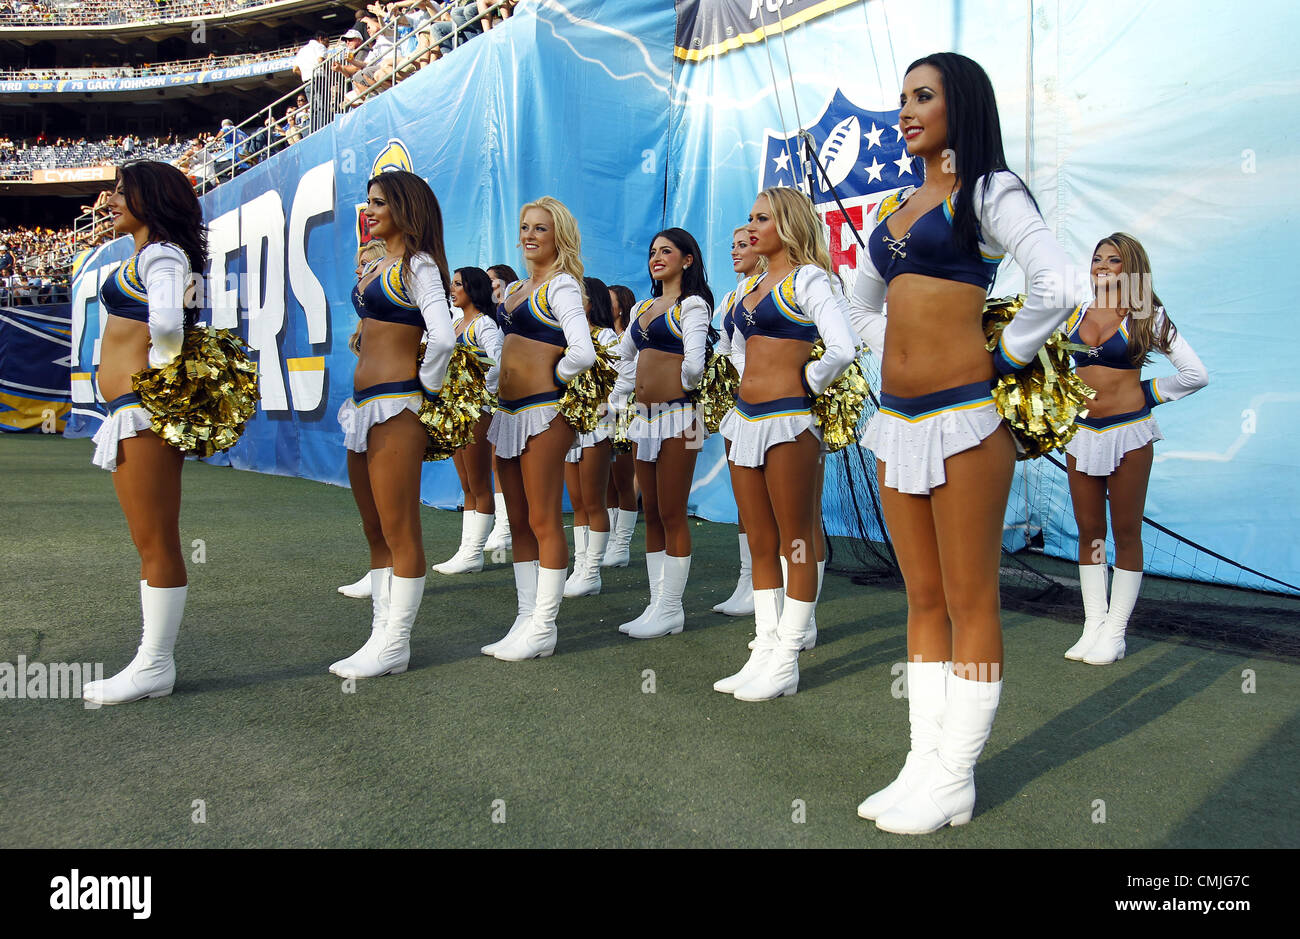 Aug. 9, 2012 - San Diego, CA, USA - August 9, 2012 - San Diego, California, USA - The San Diego Chargers cheerleaders  perform during a NFL football game against the Green Bay Packers. (Credit Image: © KC Alfred/ZUMAPRESS.com) Stock Photo